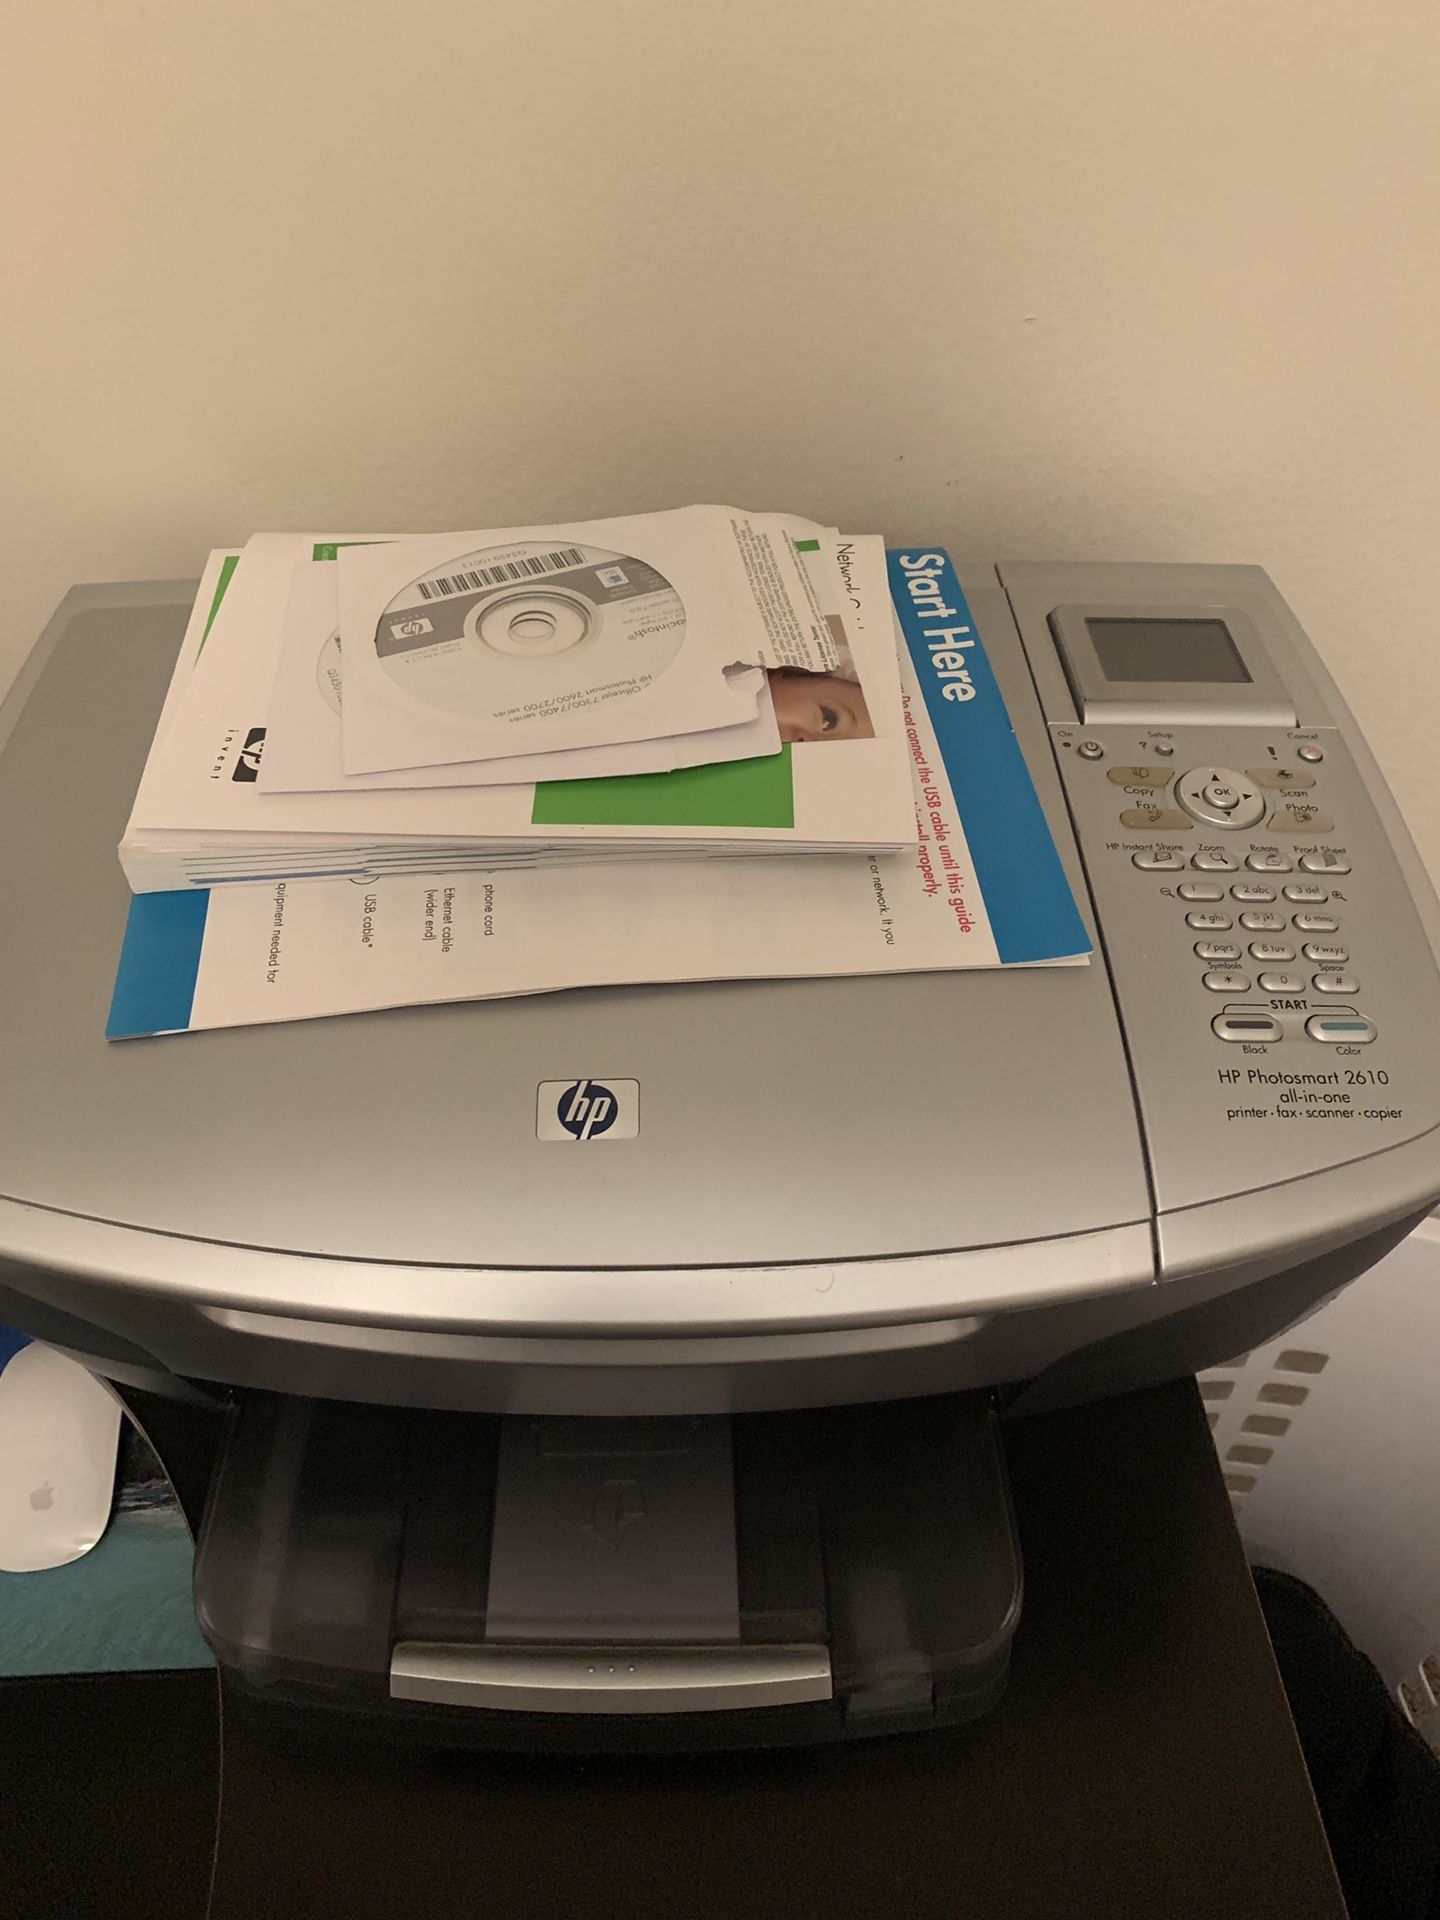 Printer All in One: Fax, Copy, and Scan